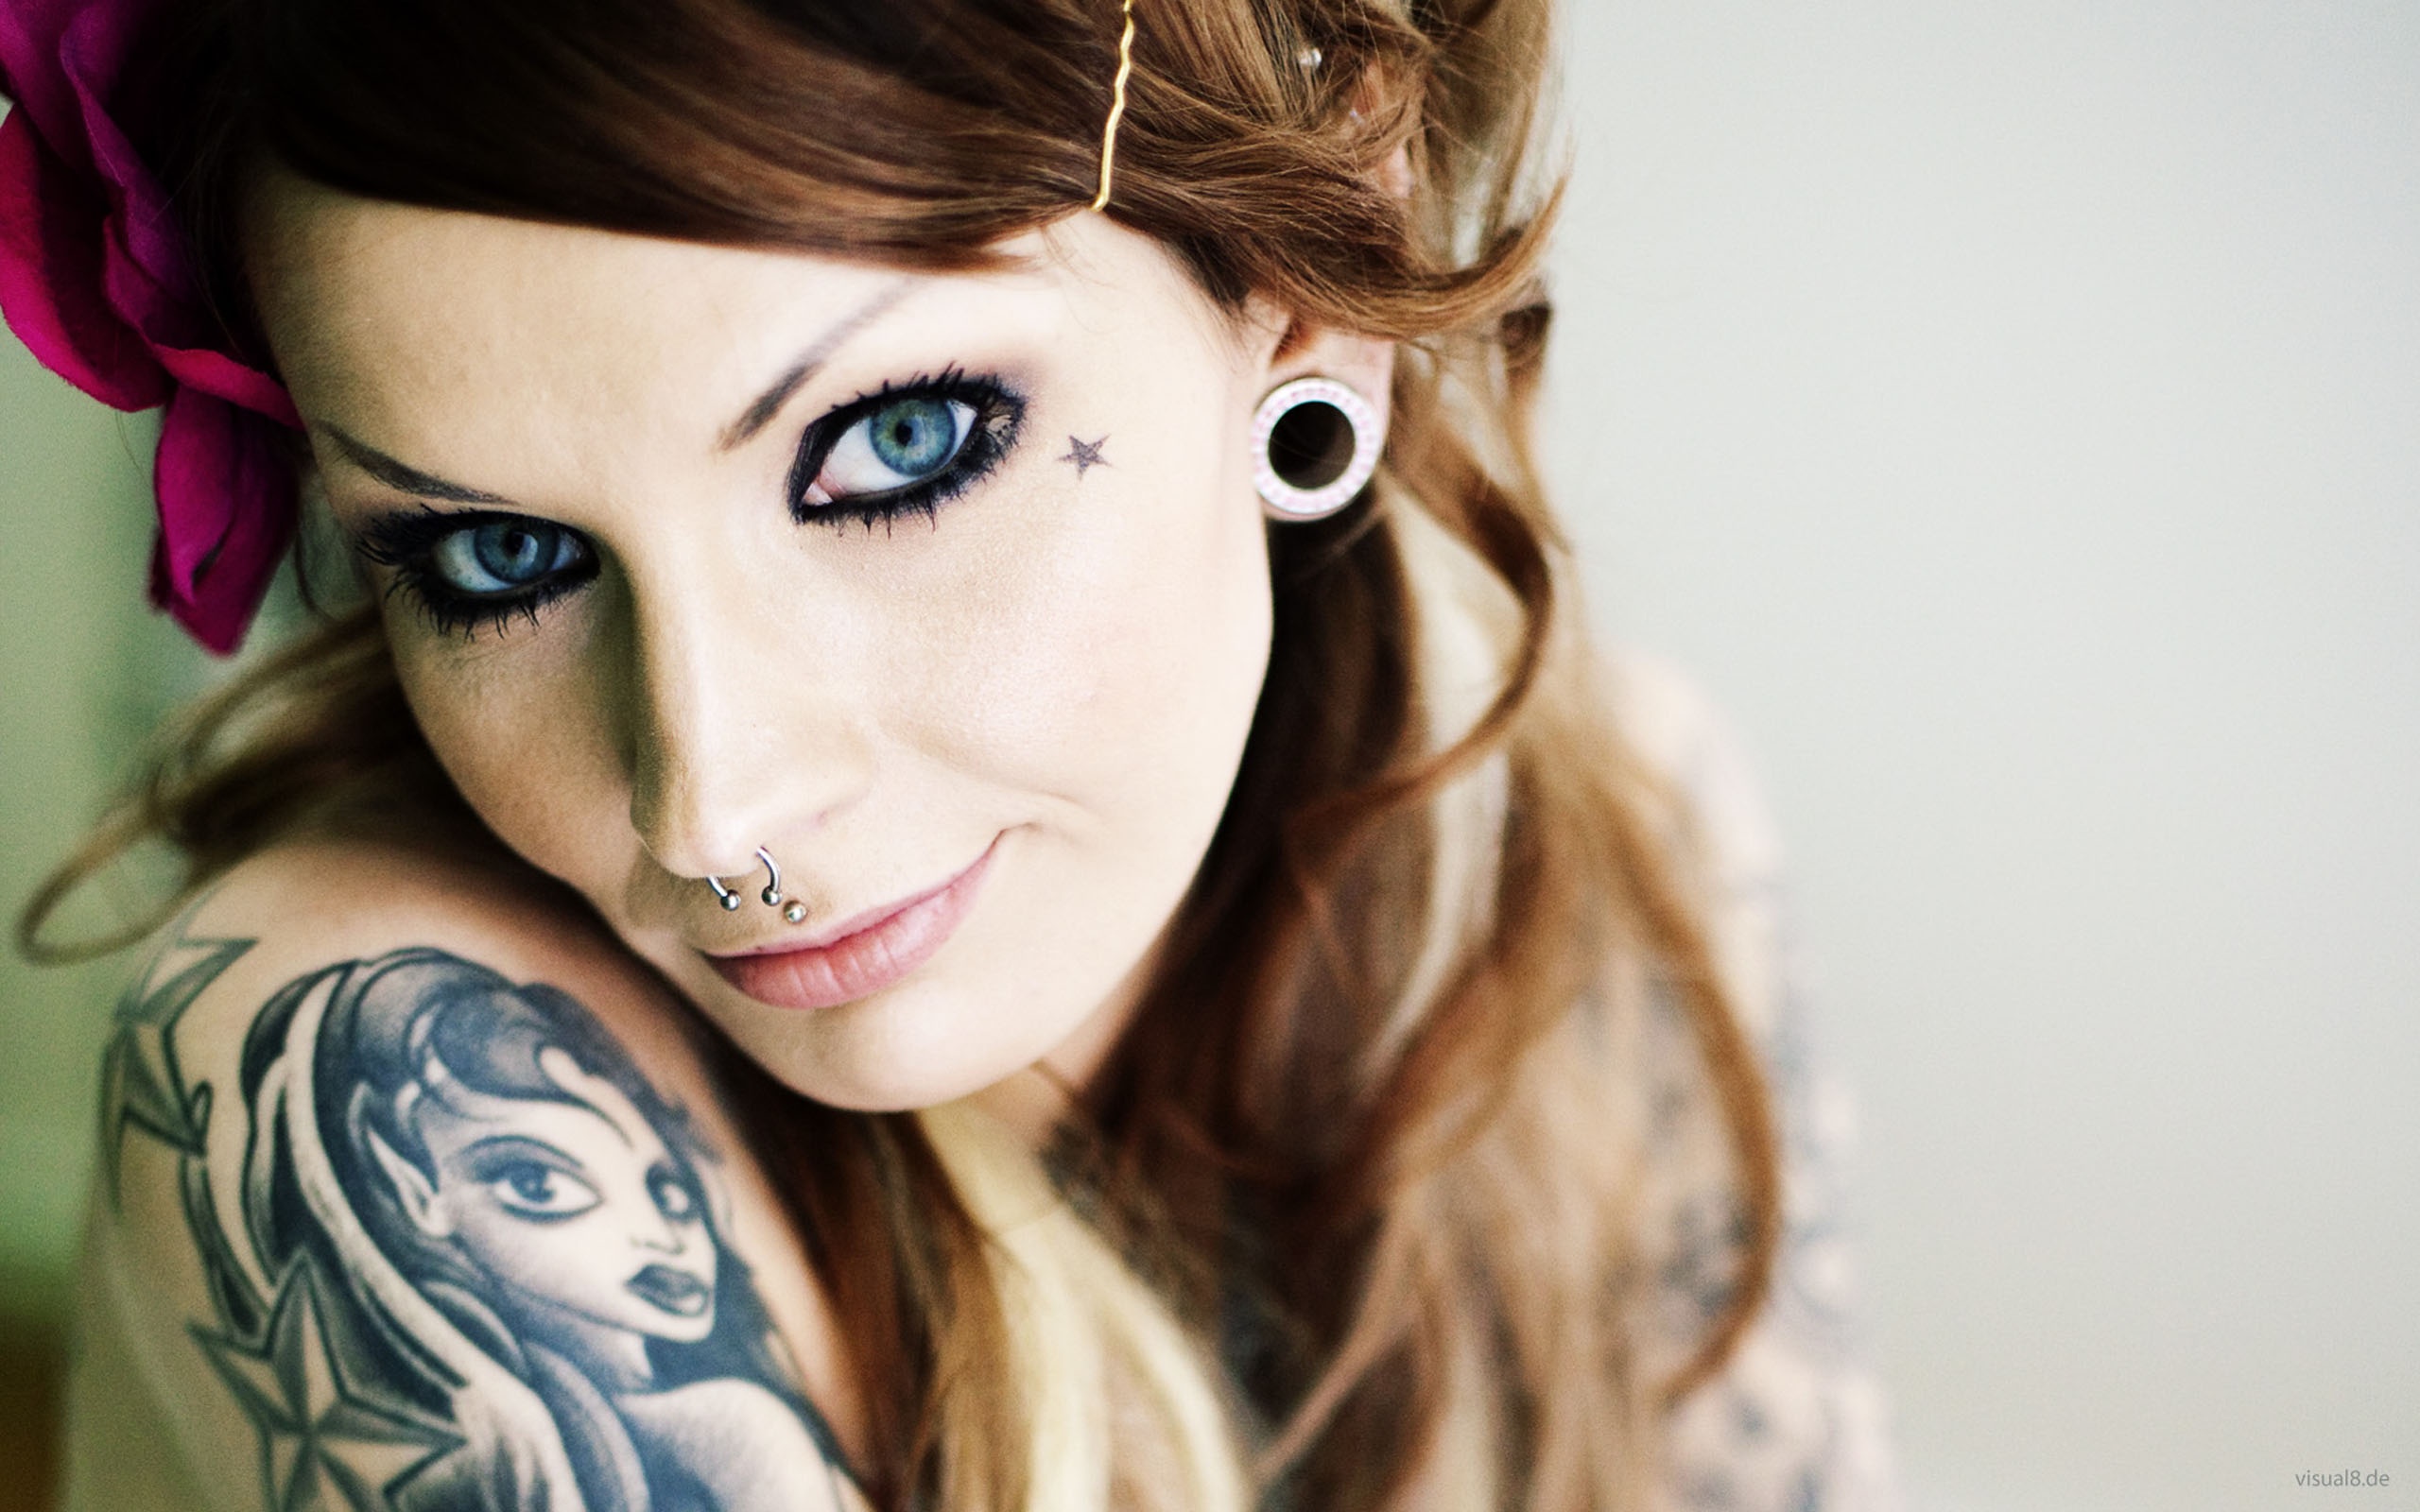 Girls with tattoo summer style smile - | TattooMagz › Tattoo Designs